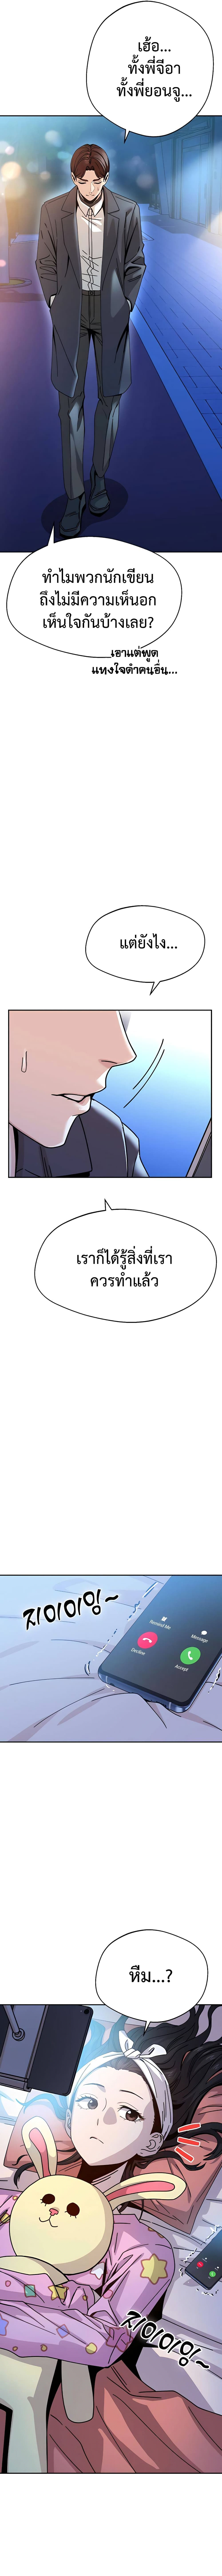 Match Made in Heaven by chance ตอนที่ 18 (17)